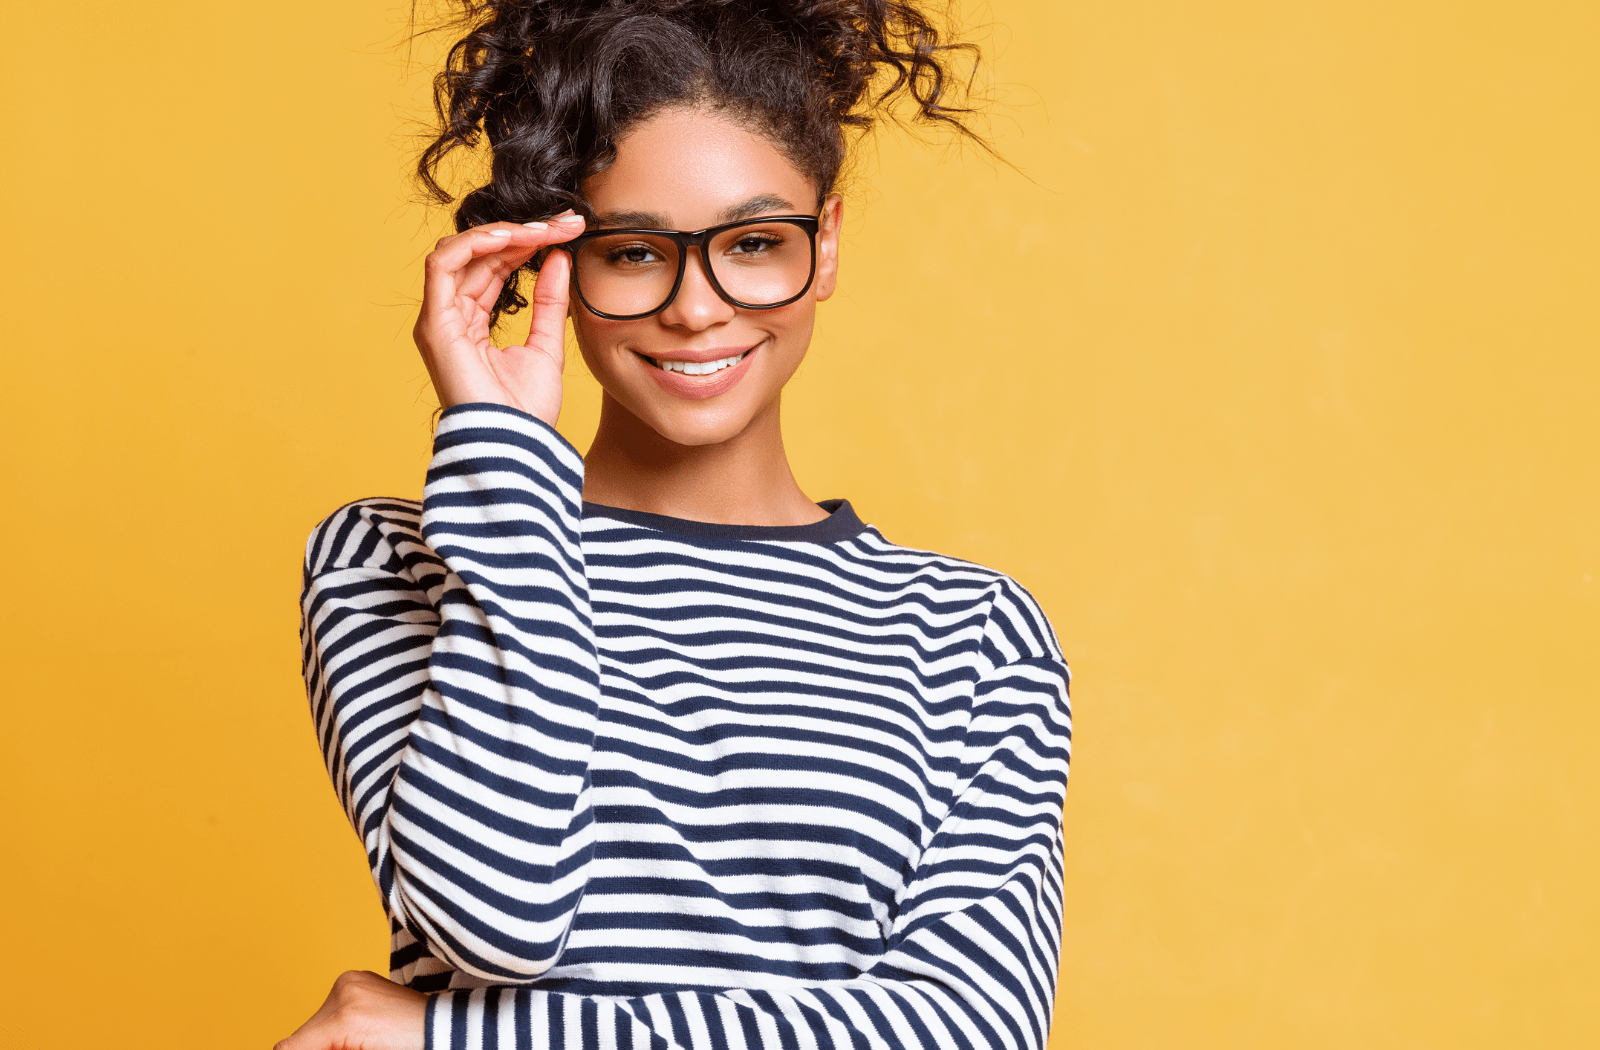 A young woman wearing large, black-rimmed glasses and a black and white striped shirt against a yellow backdrop